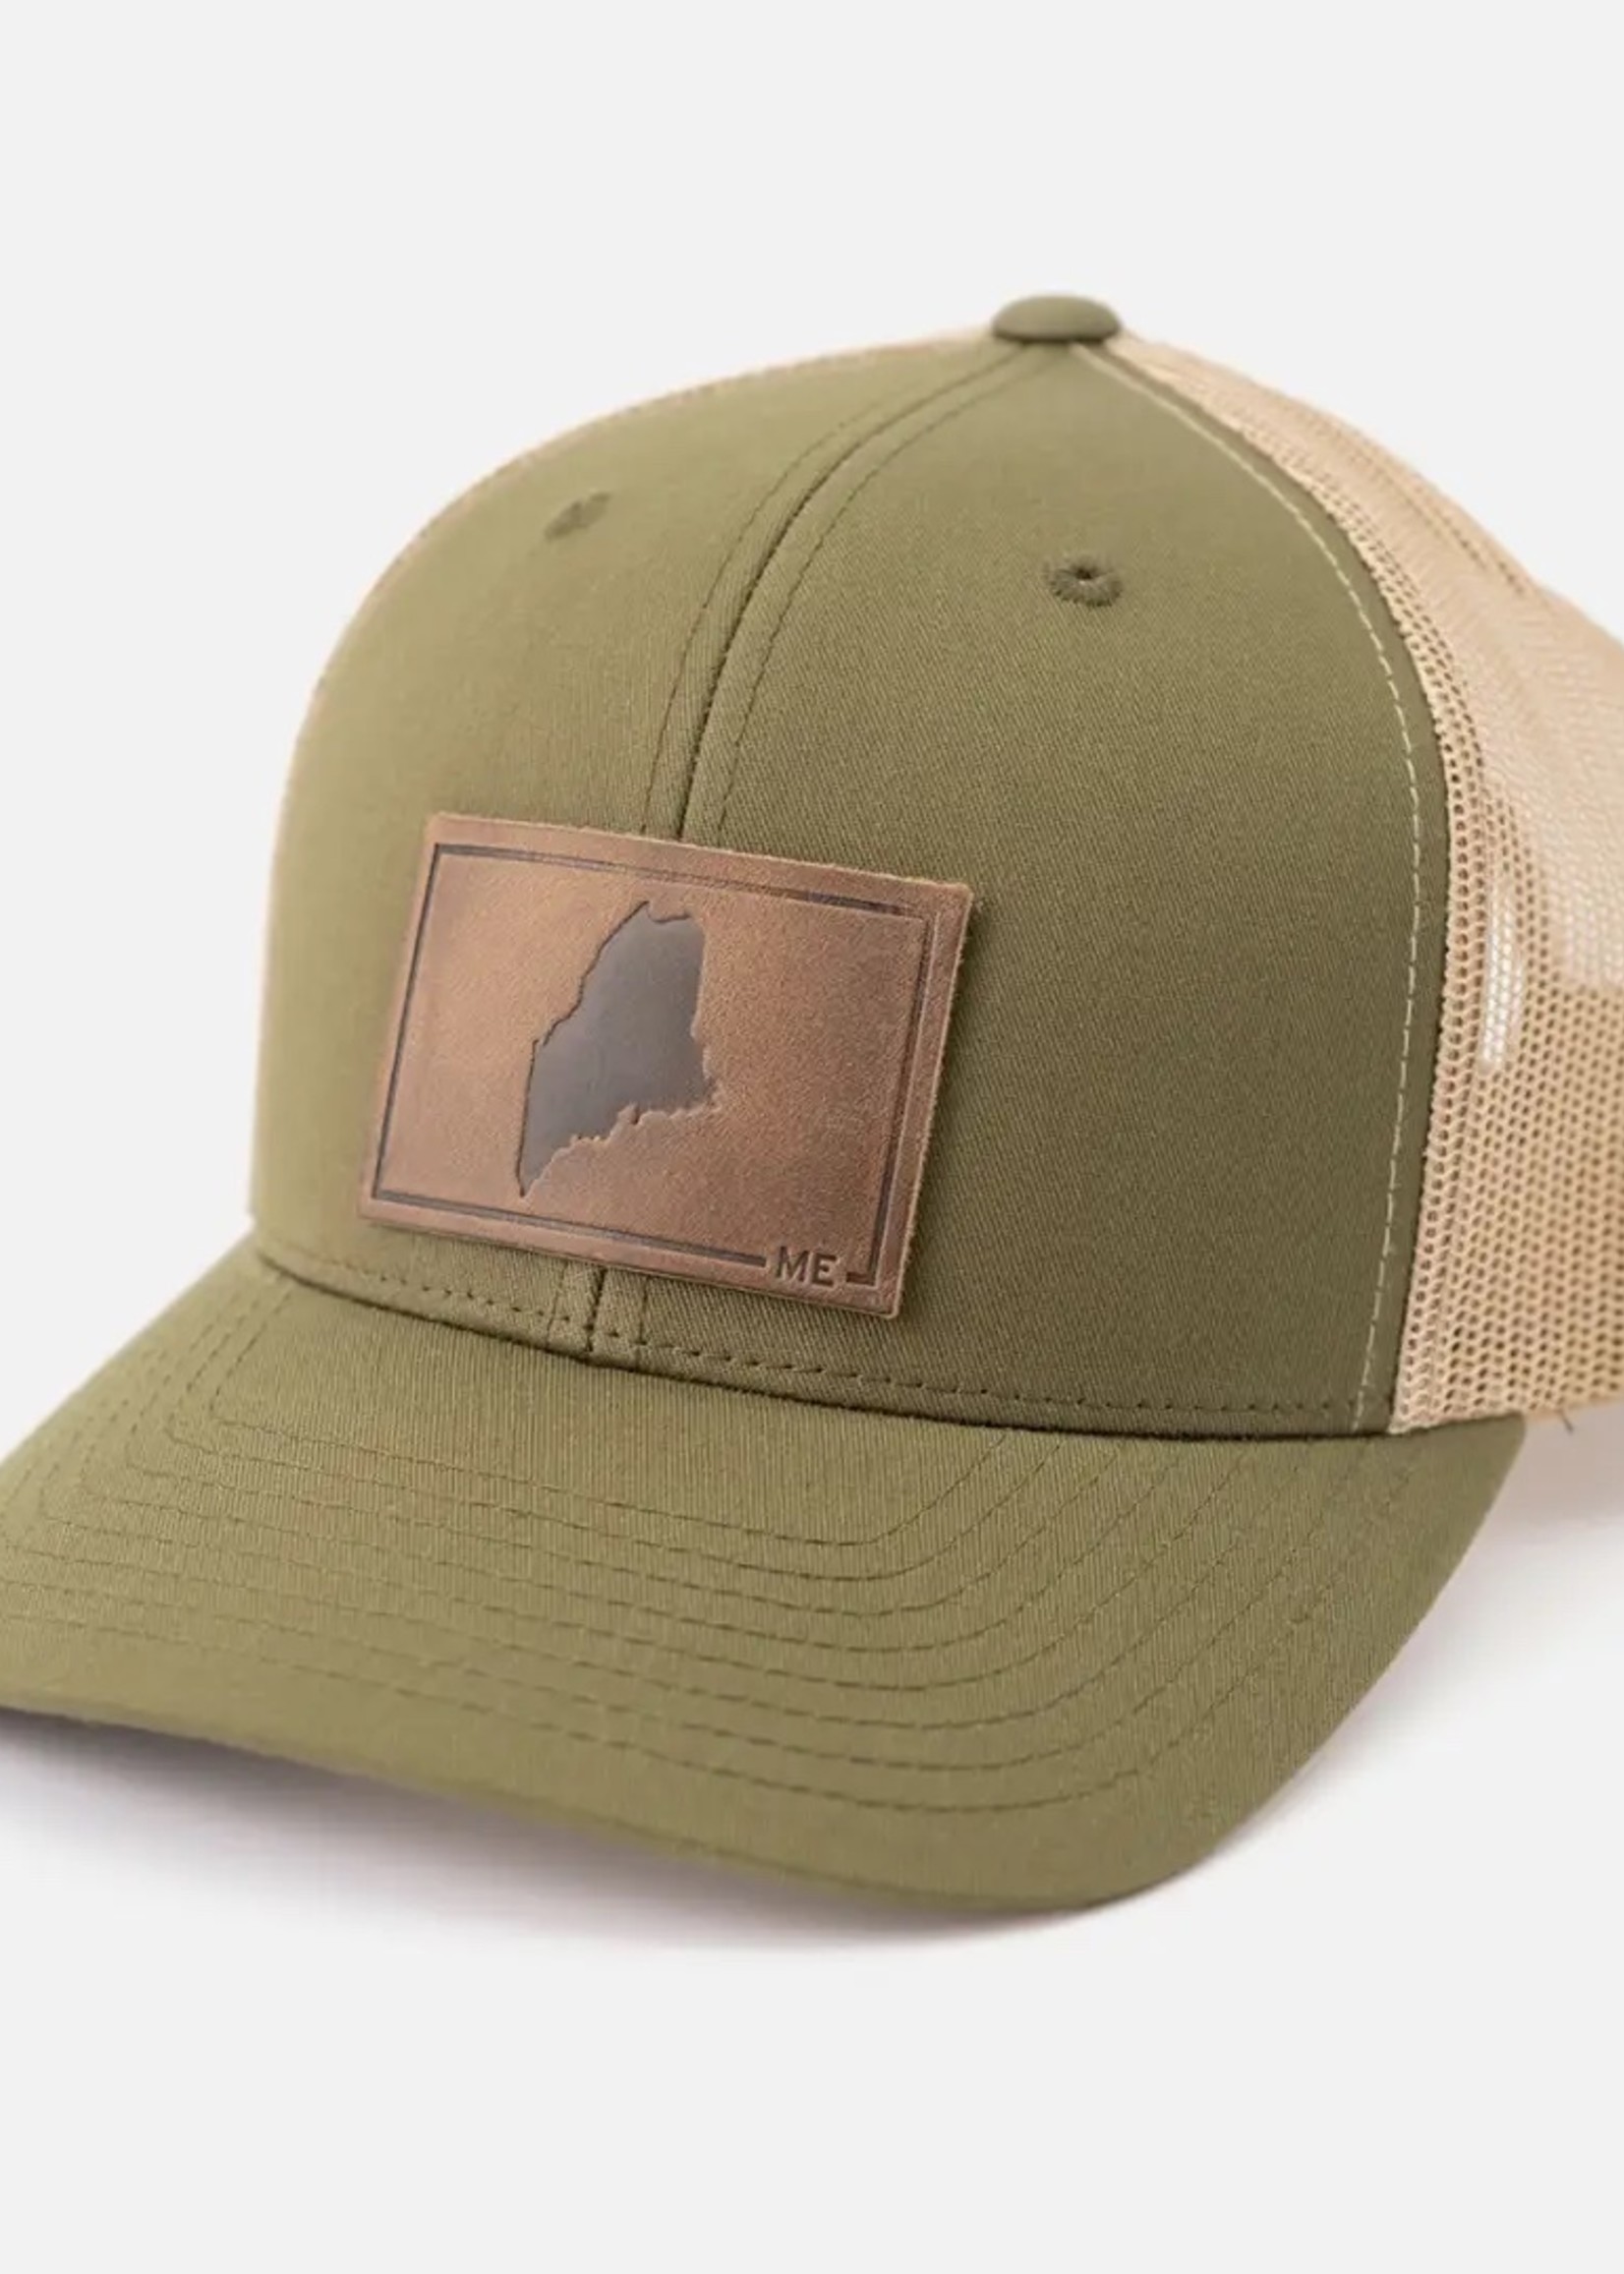 Range Leather Co. Maine State Hat